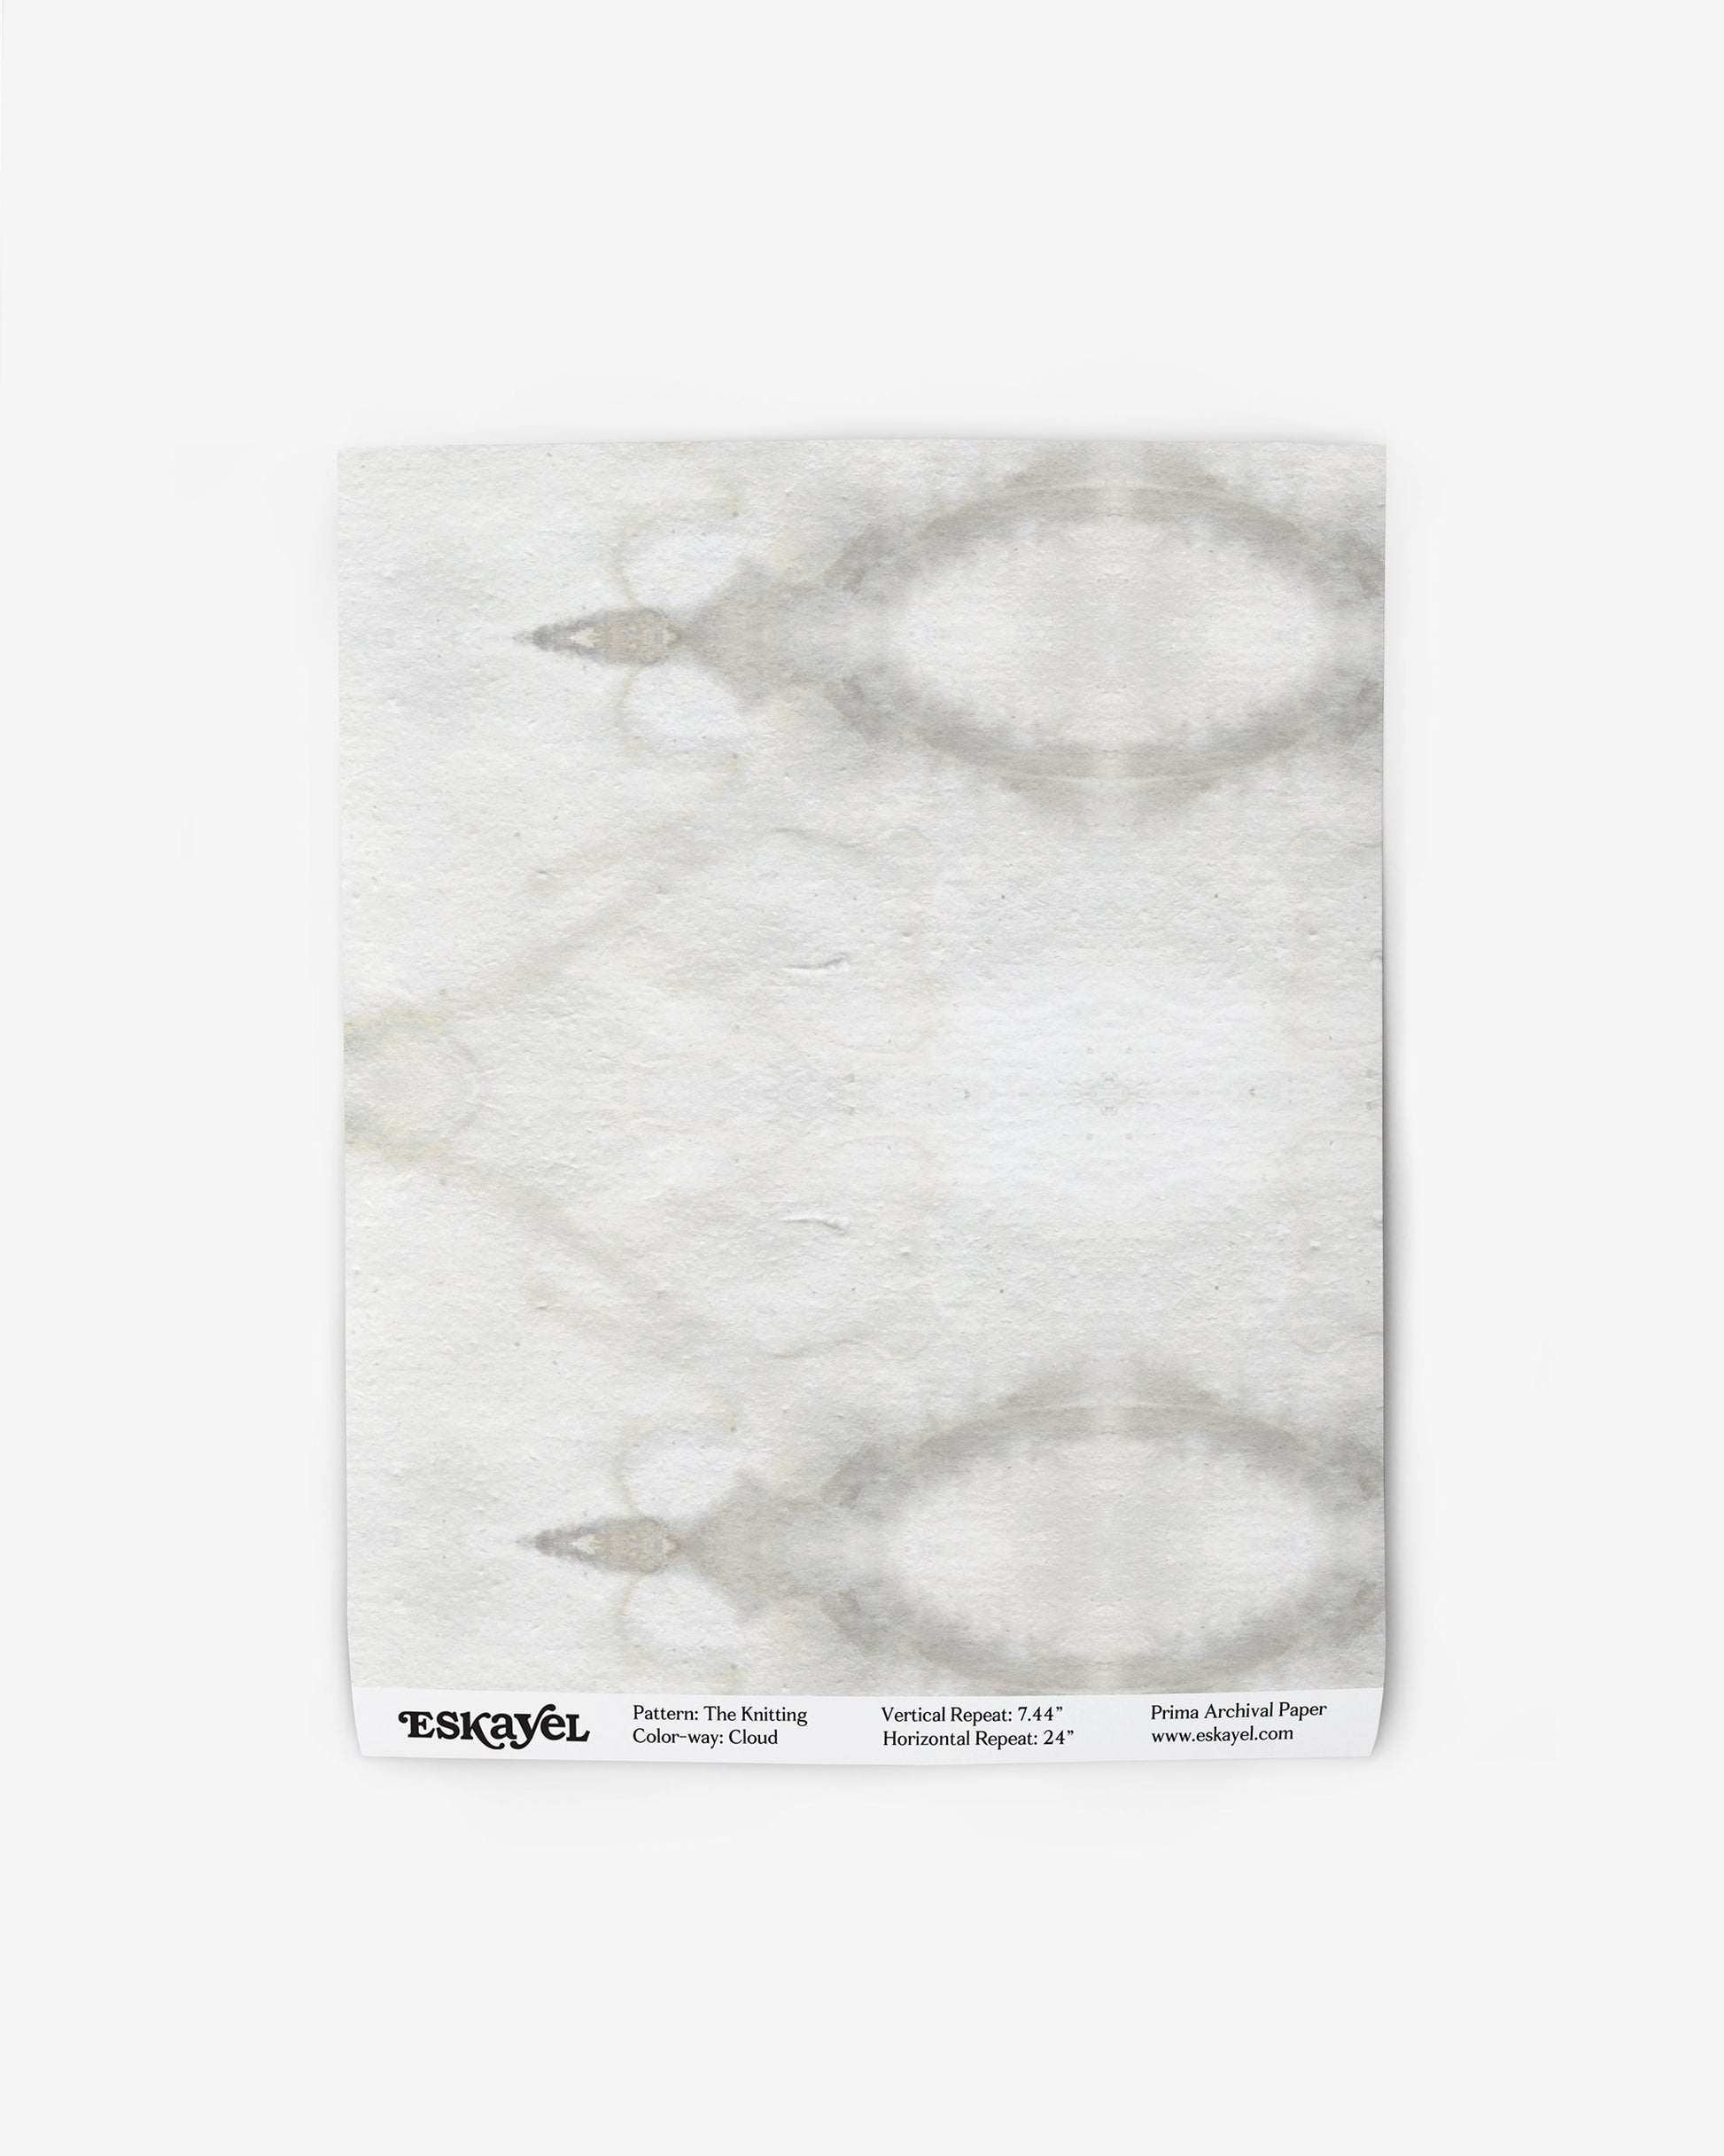 A white wallpaper with a marble pattern from The Knitting Wallpaper Cloud Collection